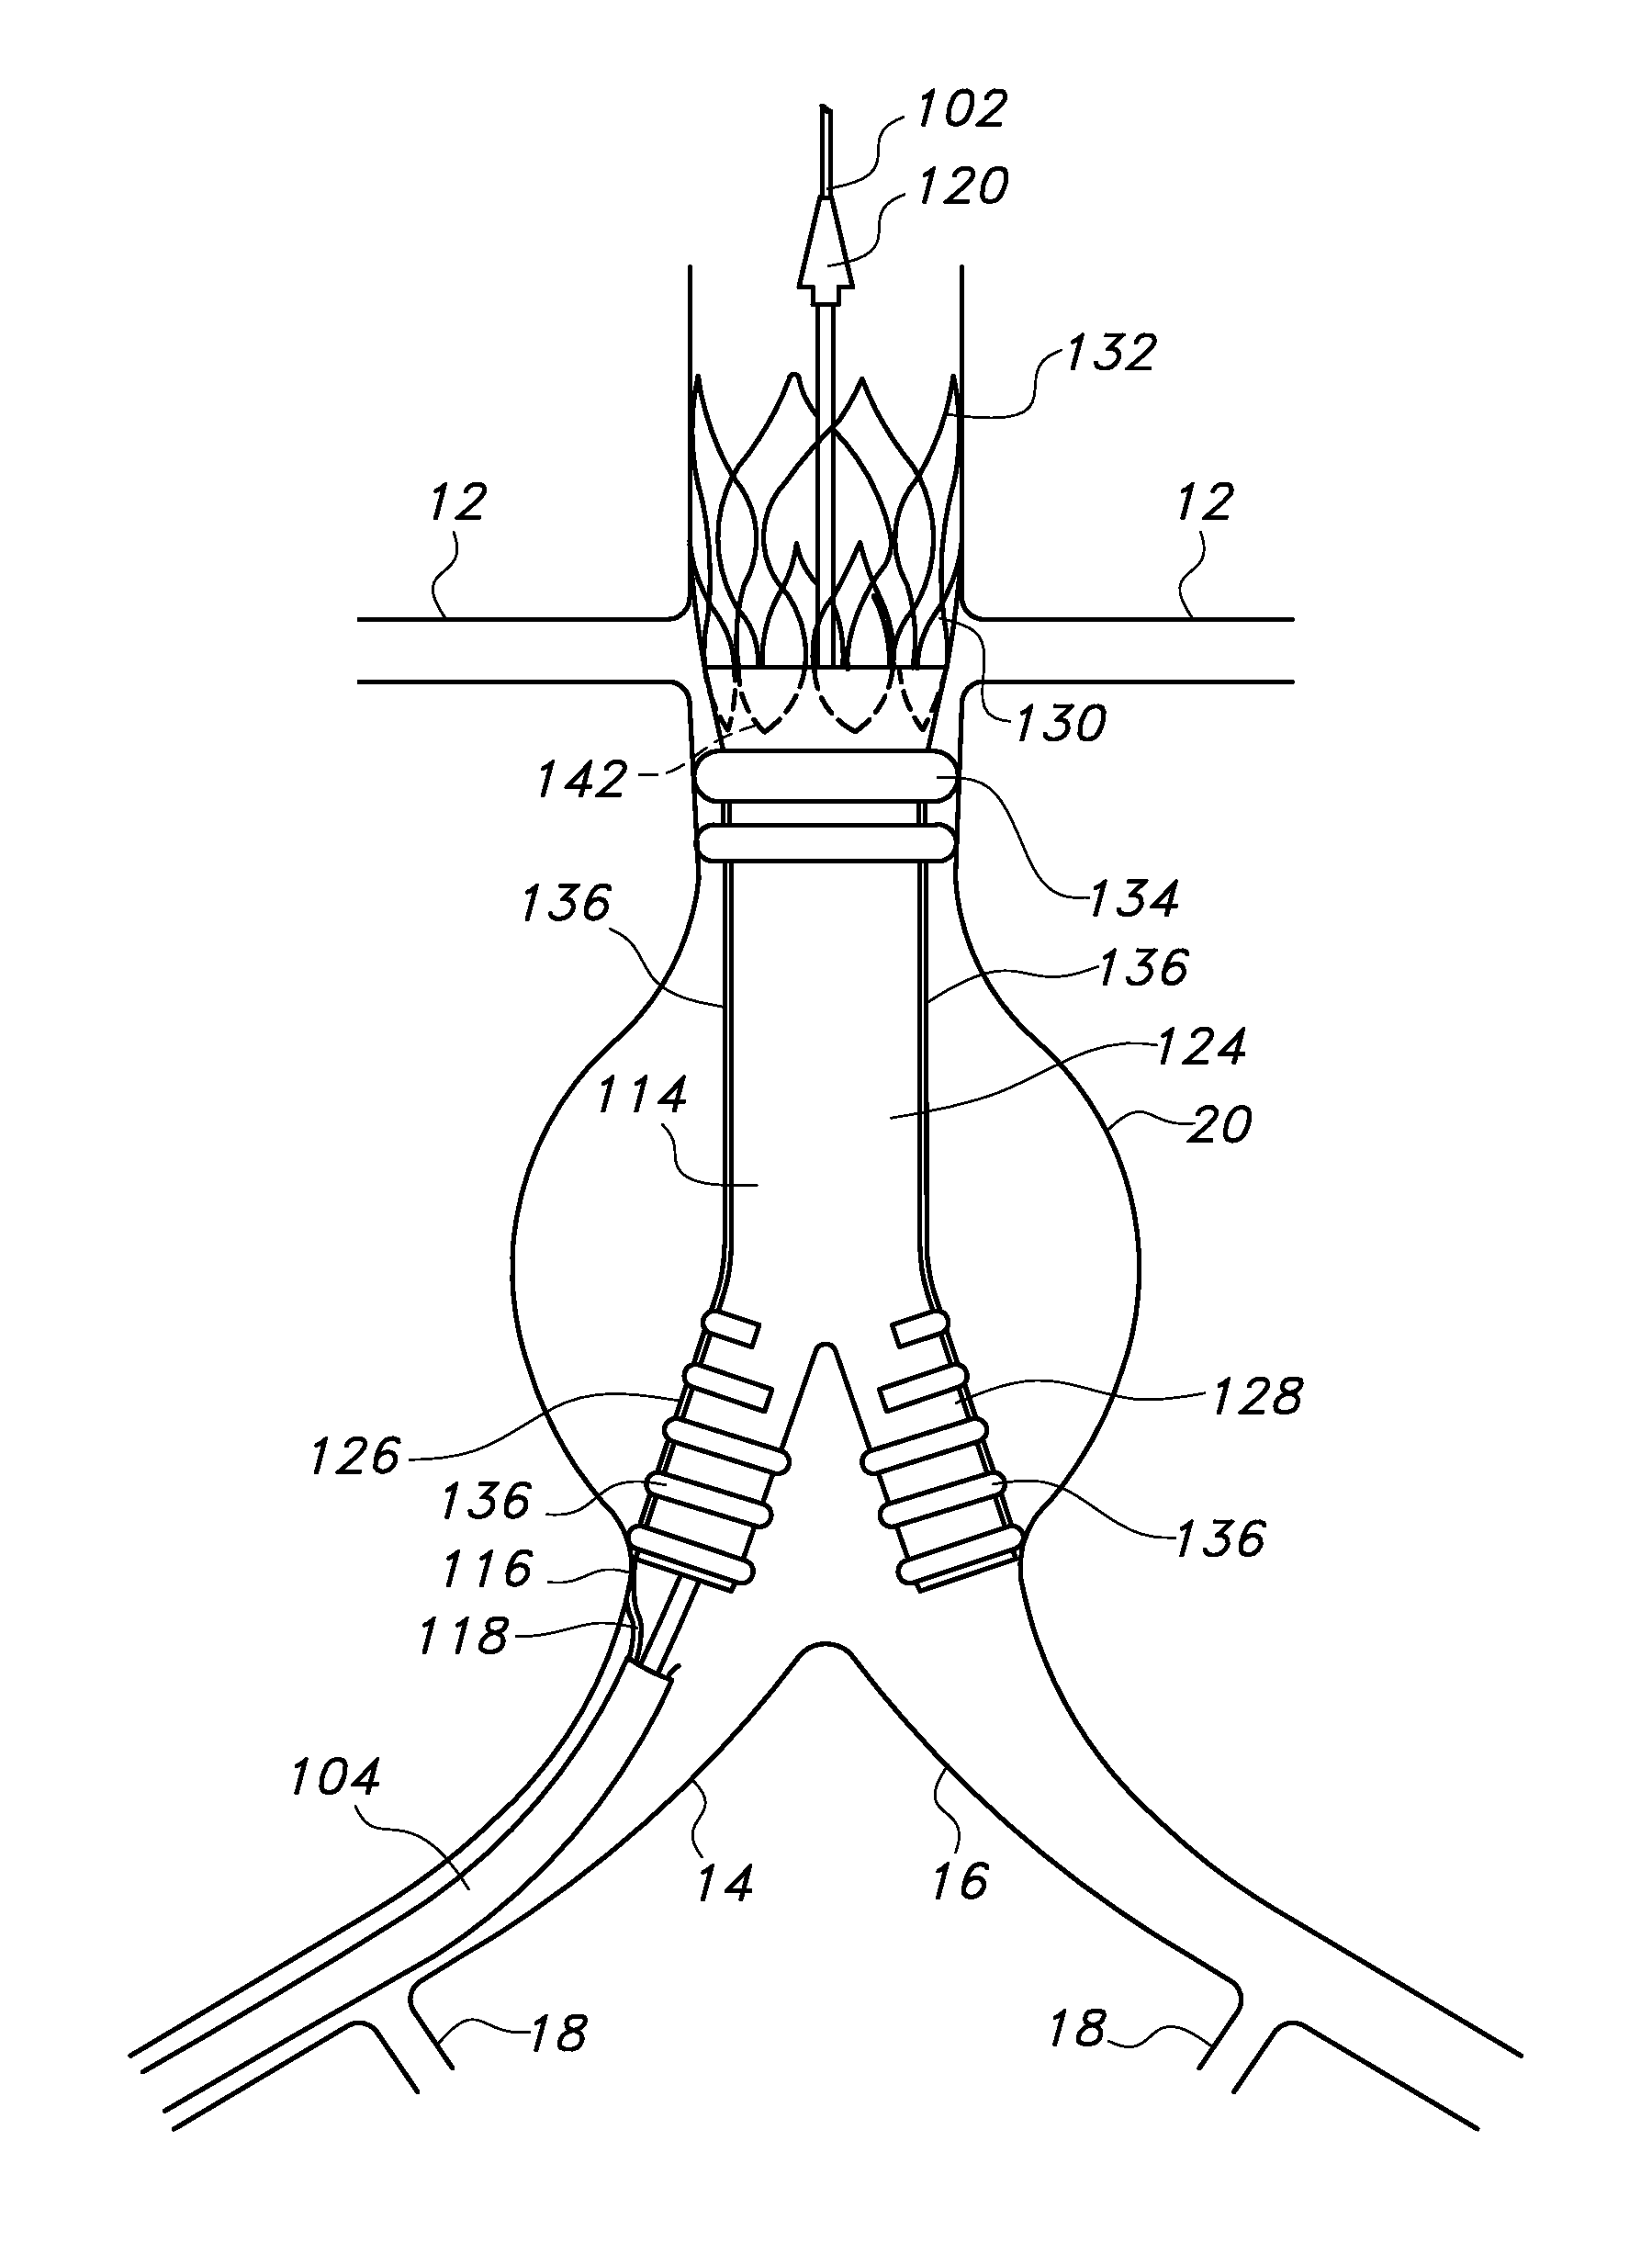 Bifurcated endovascular prosthesis having tethered contralateral leg